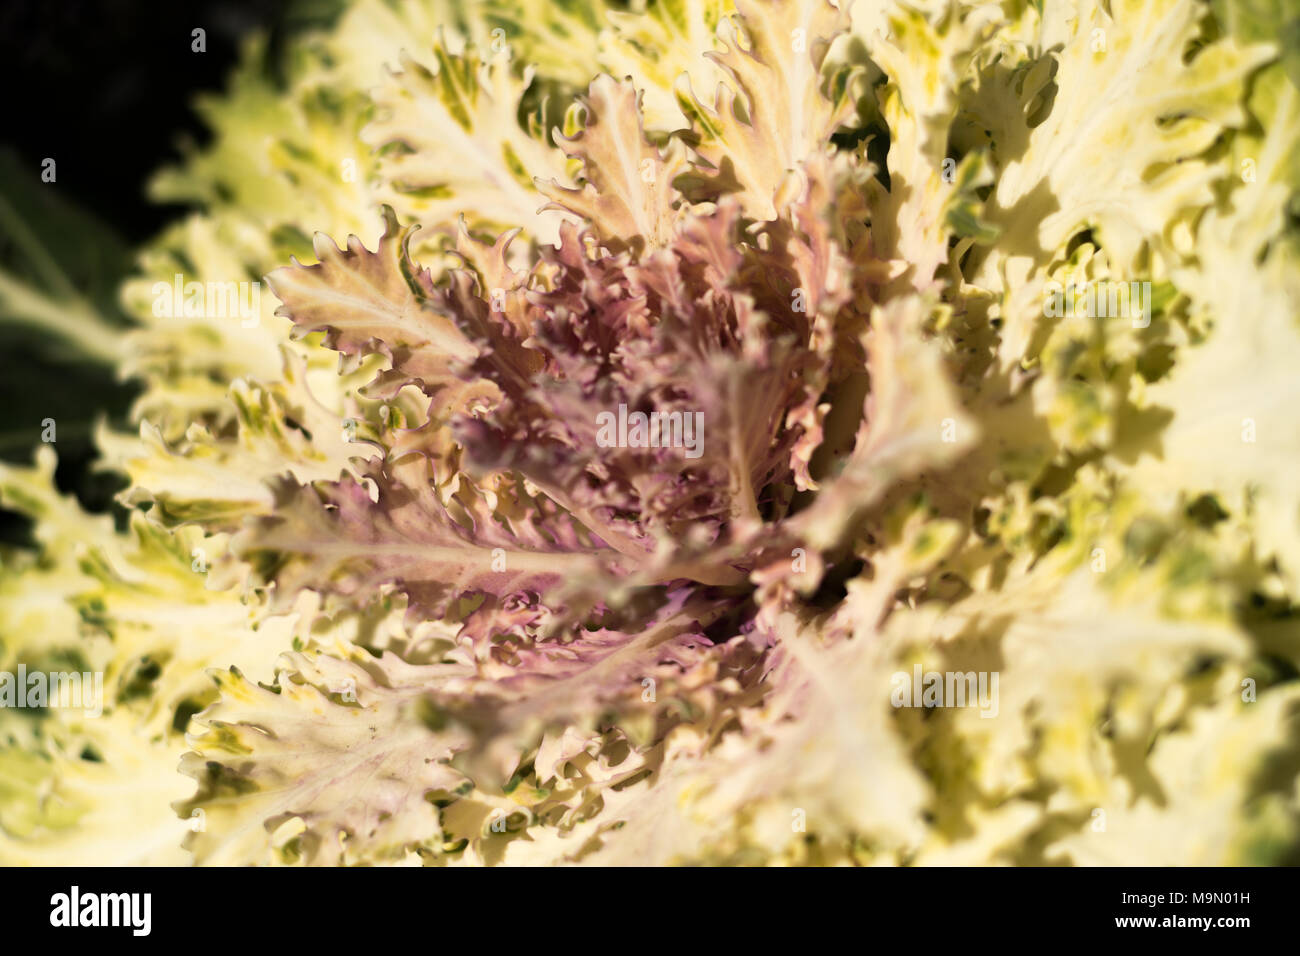 Close up of single cultivated flowering kale (Brassica oleracea) plant Stock Photo